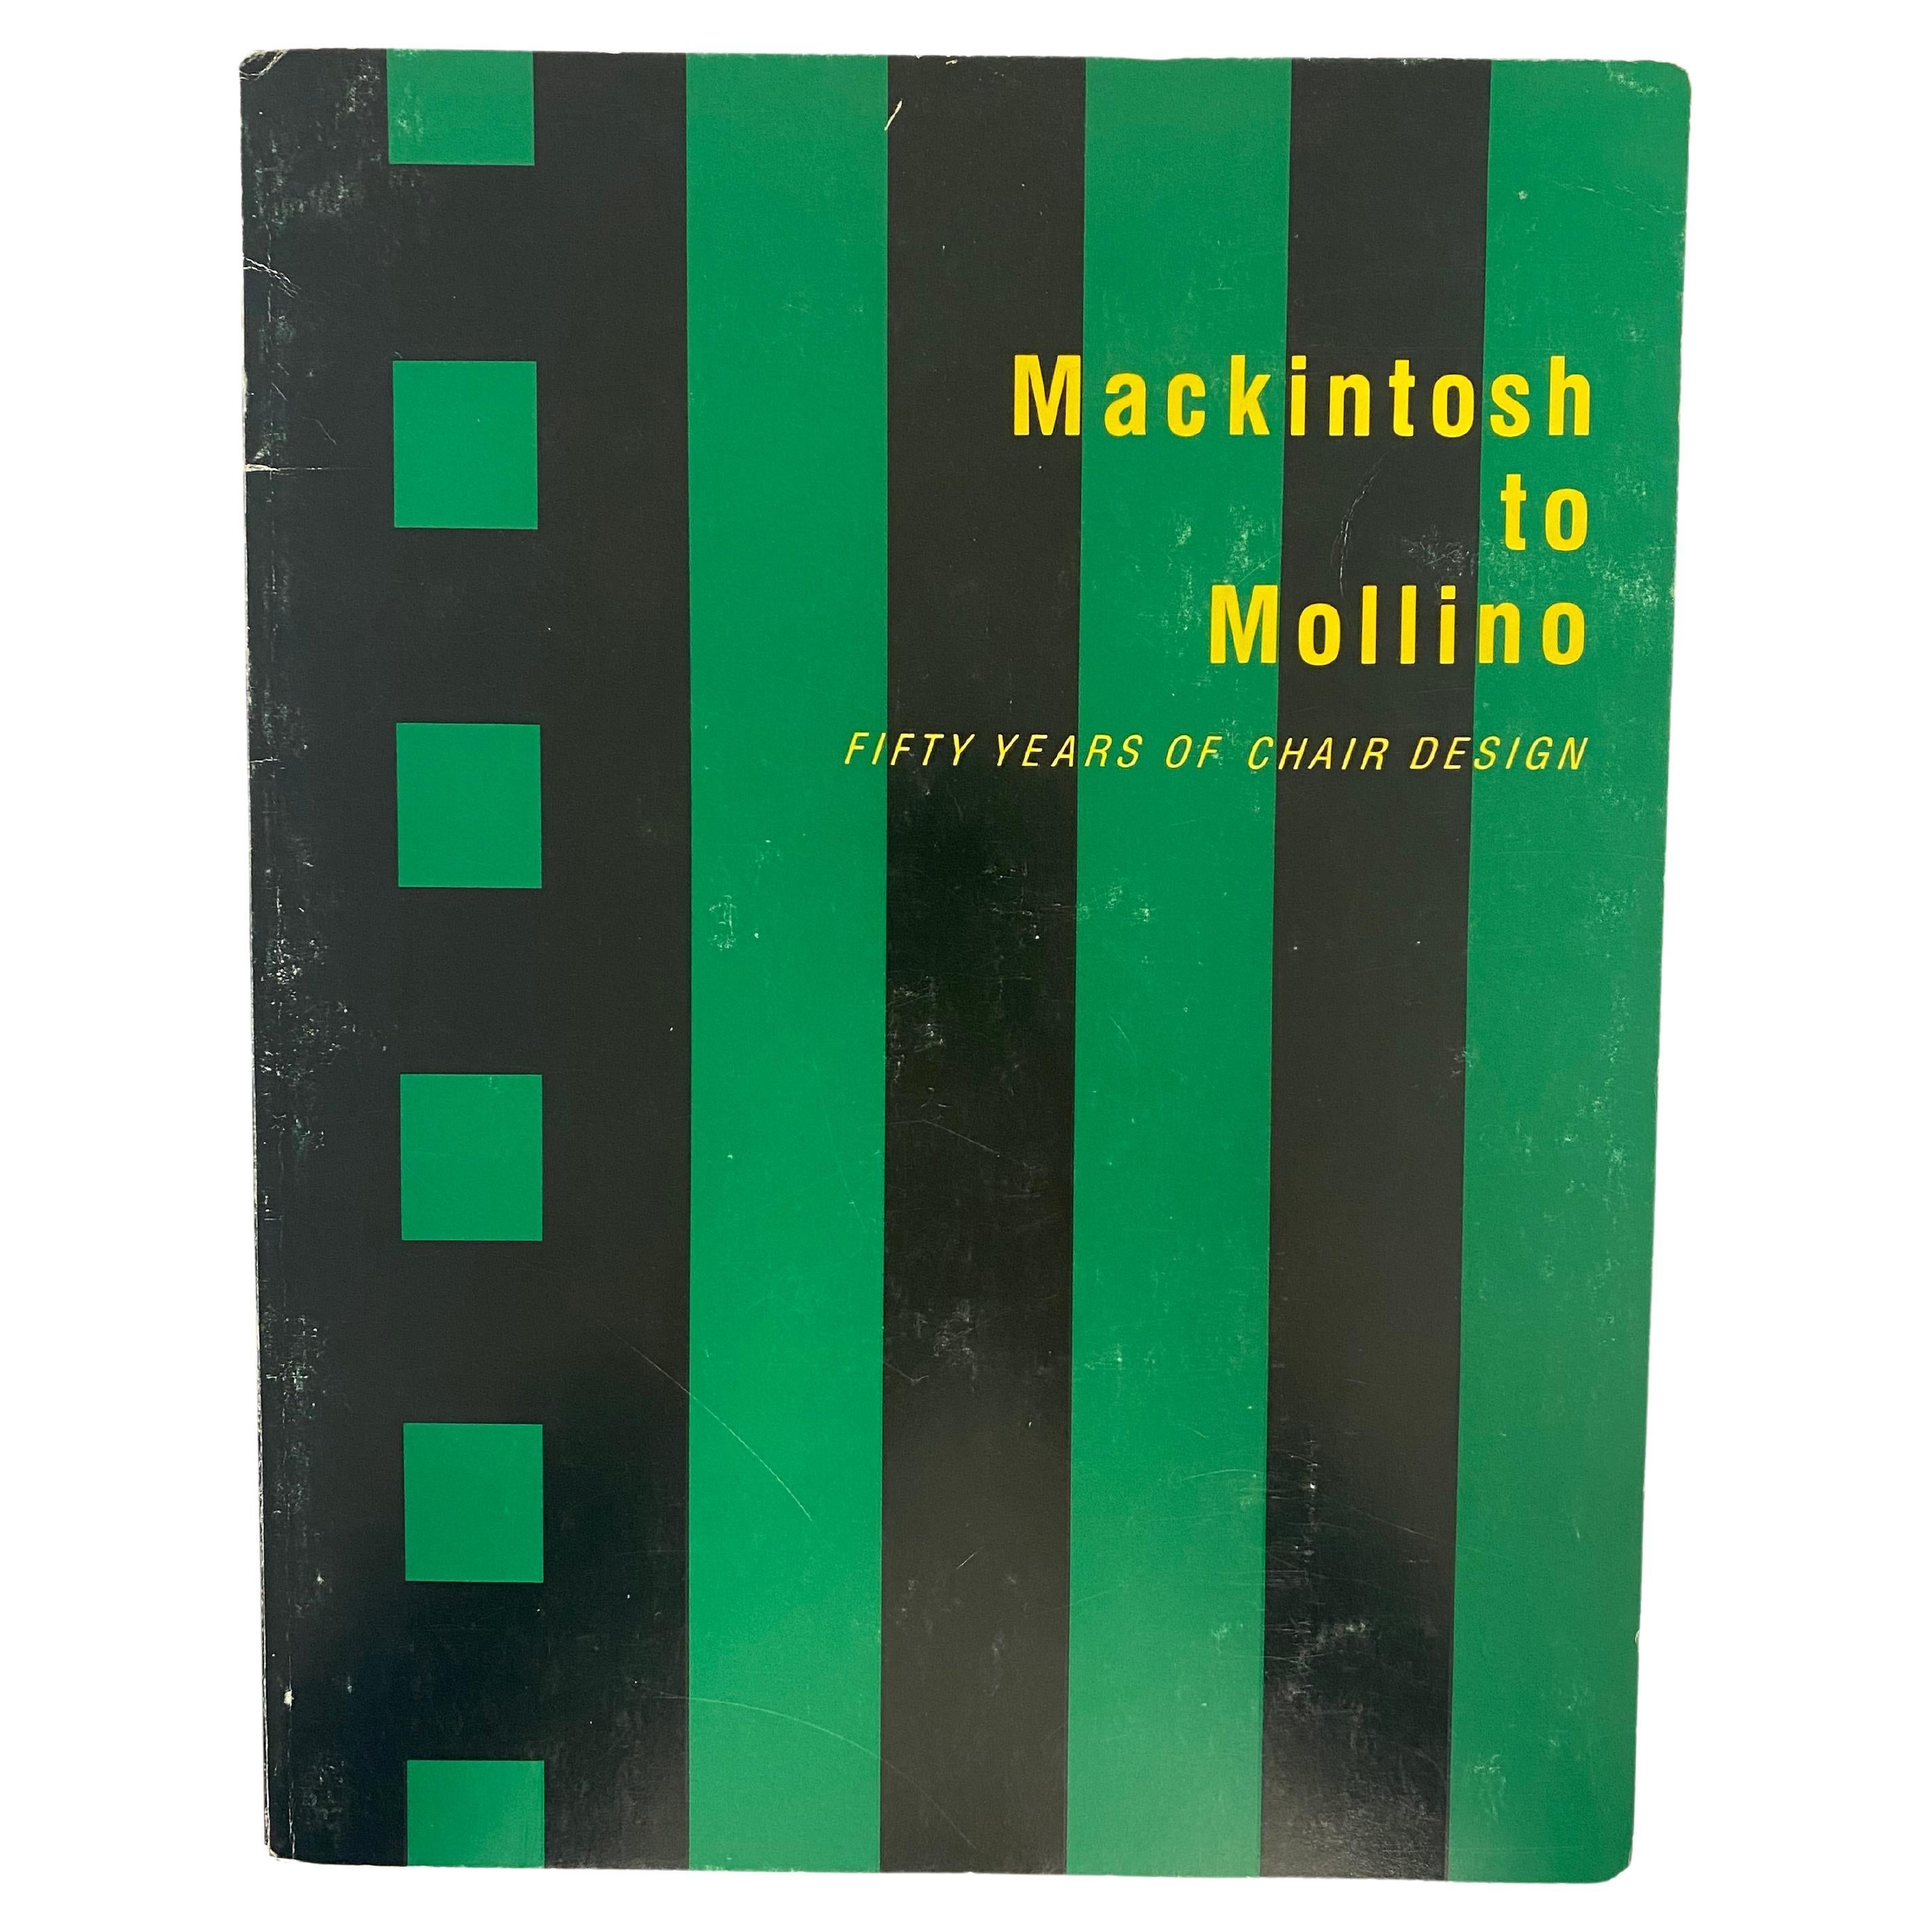 Mackintosh to Mollino: Fifty Years of Chair Design by Derek E. Ostergard (Book) For Sale